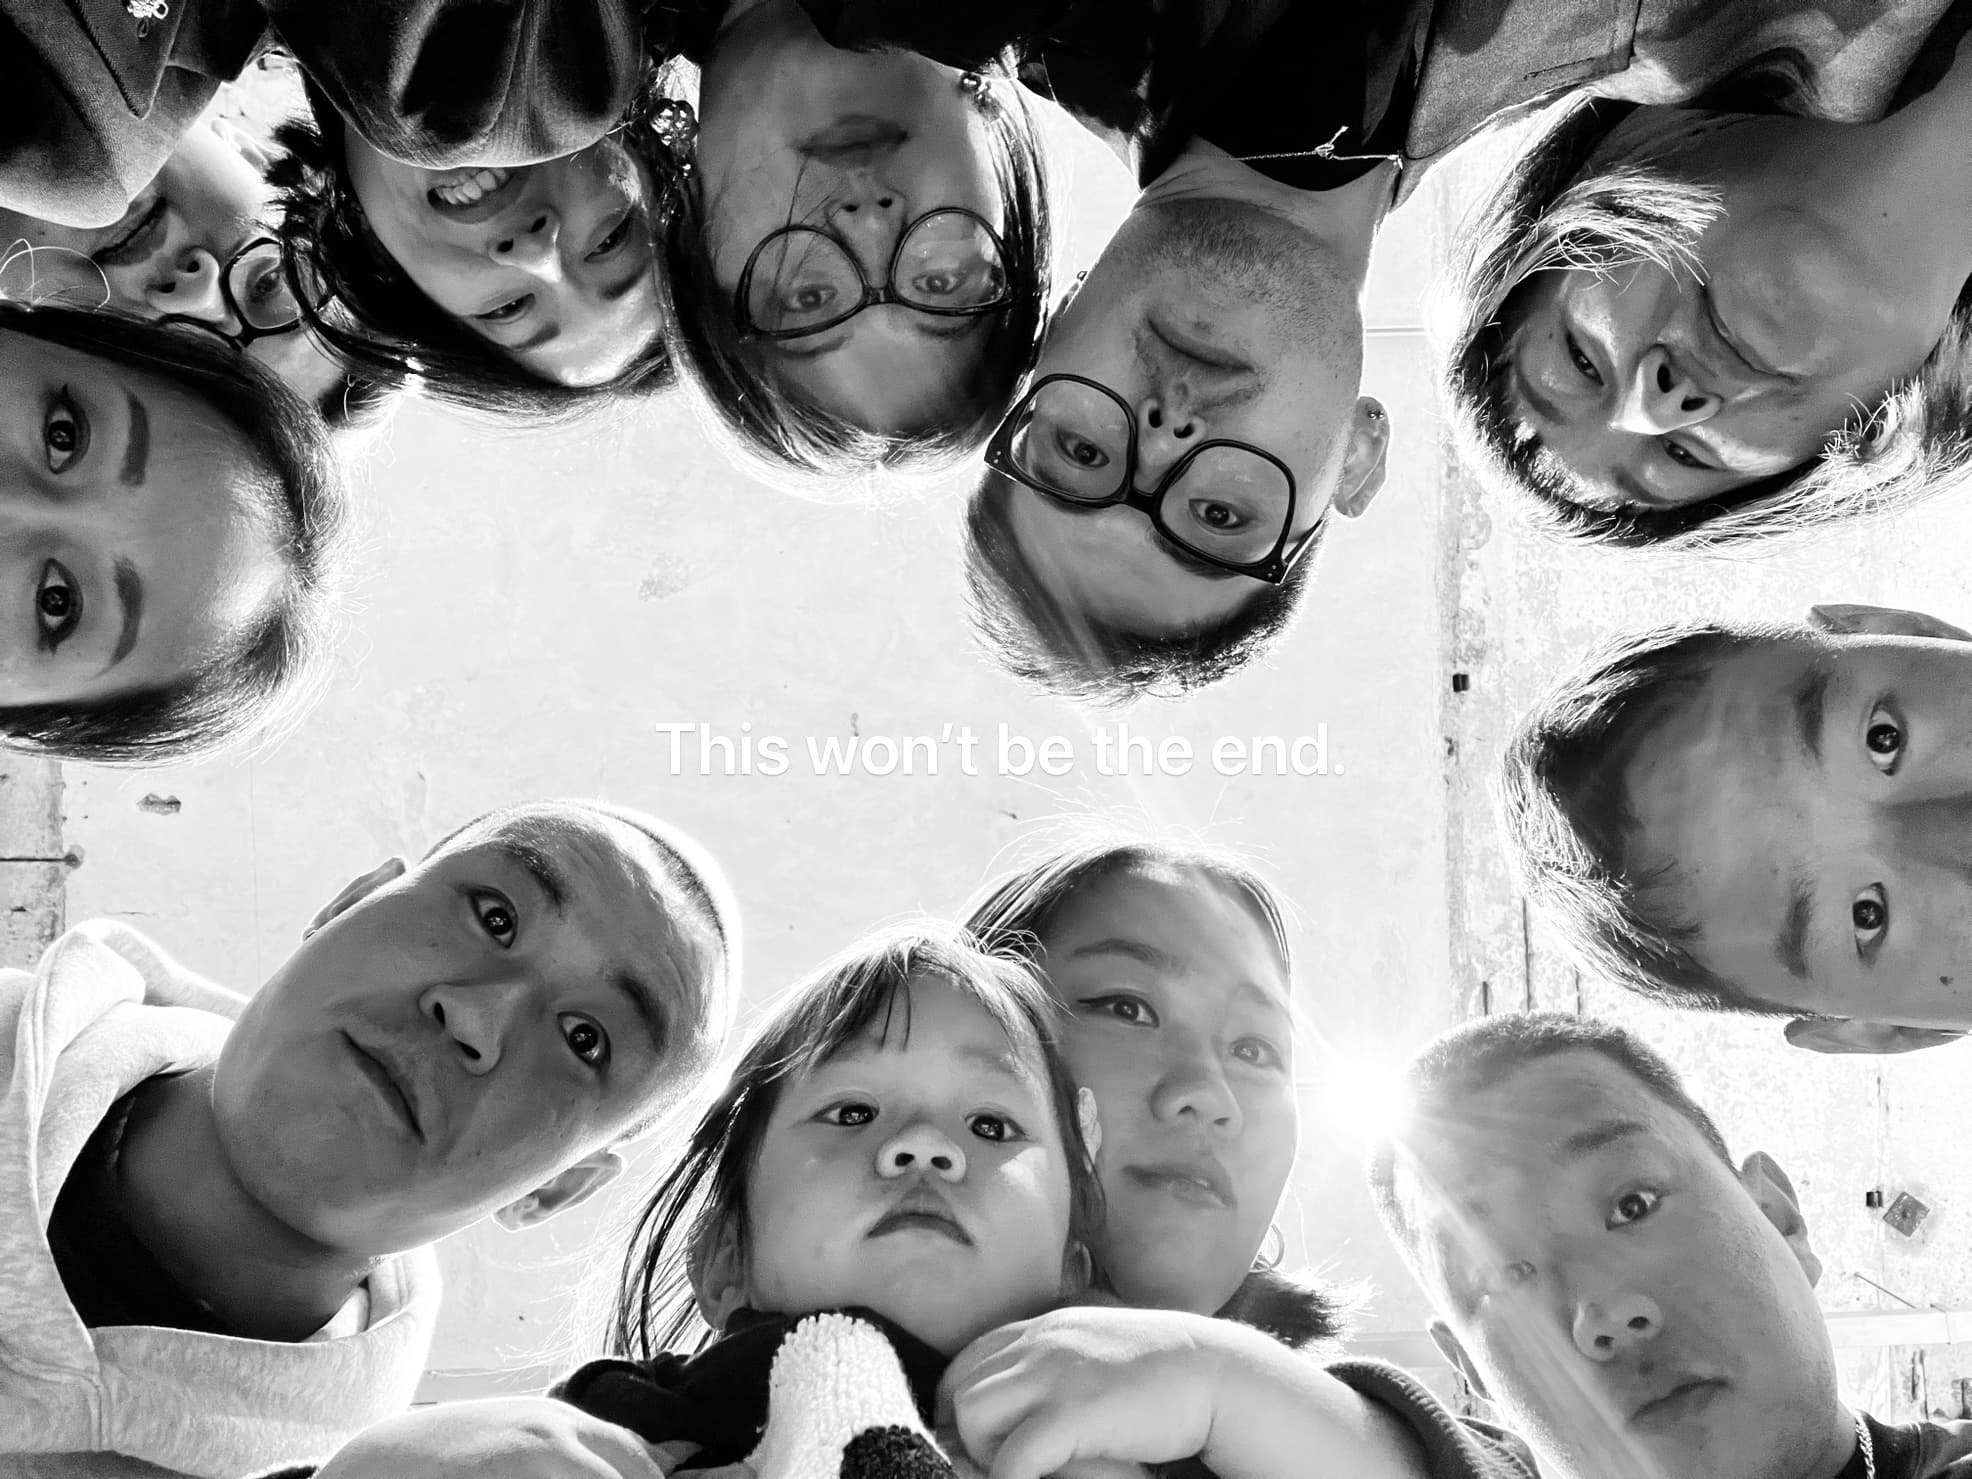 A group of Weber Shandwick employees stand in a circle, looking down. Text in the center reads: "This won't be the end."